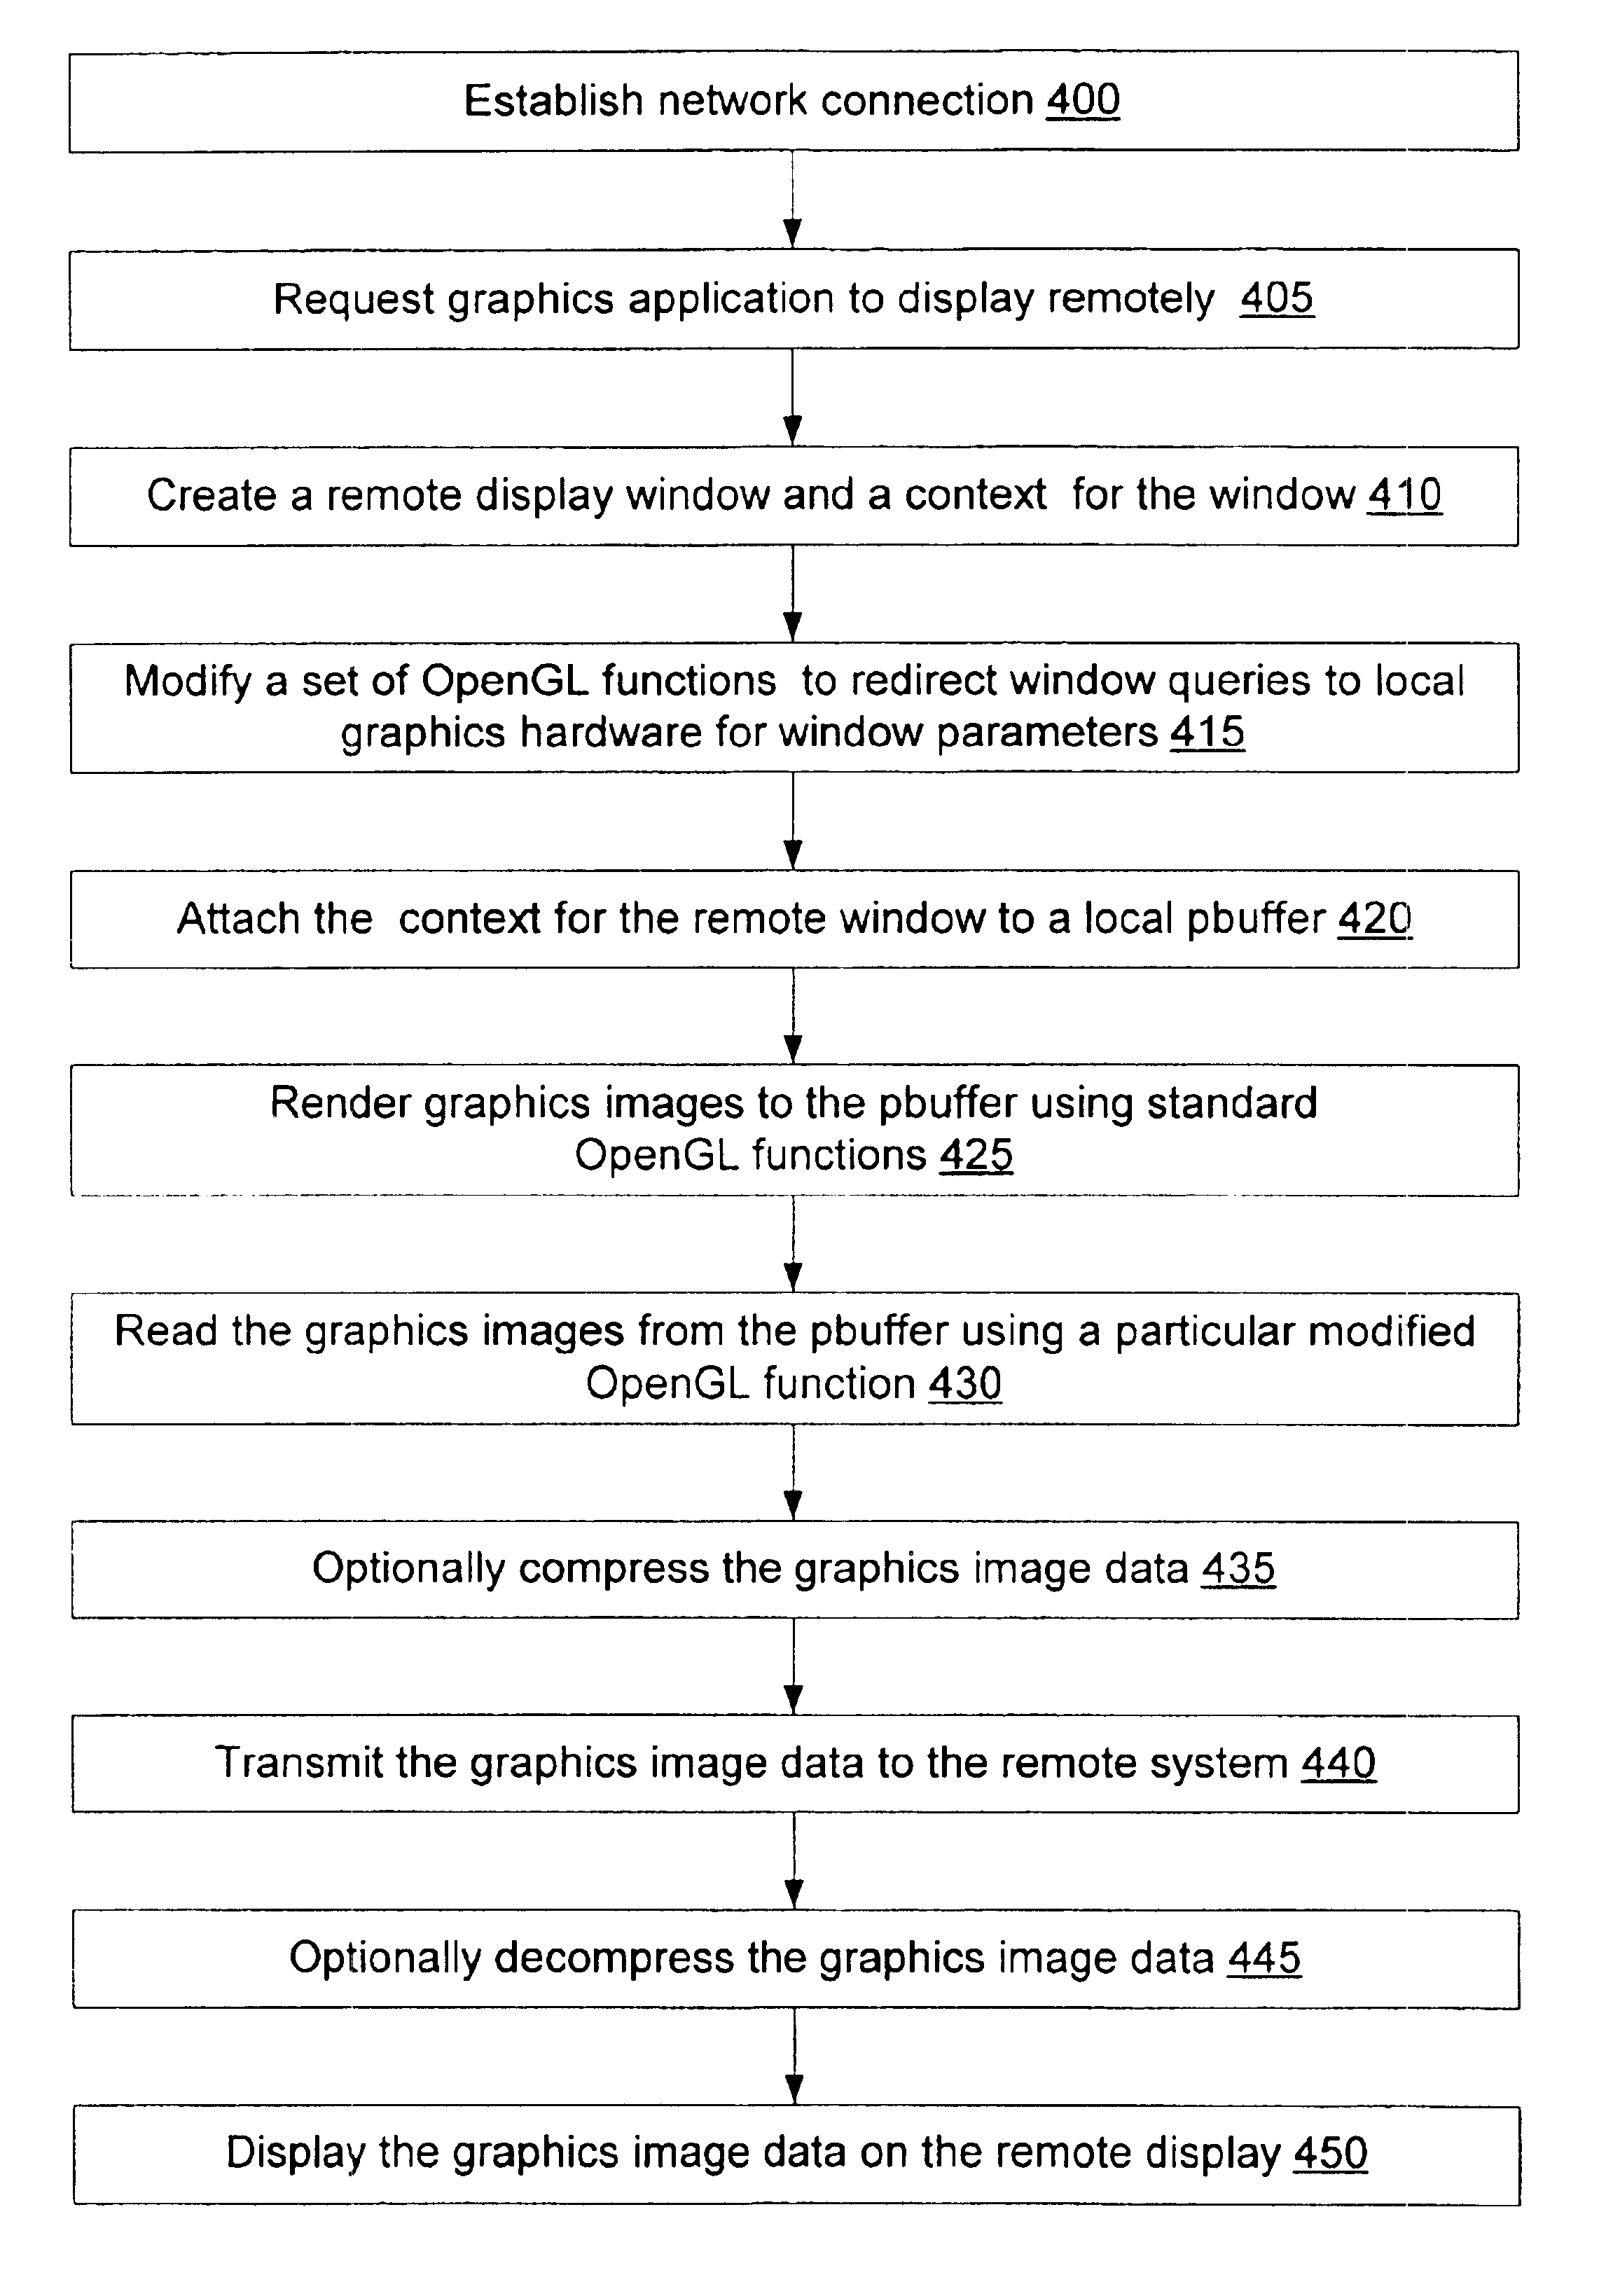 Acceleration of graphics for remote display using redirection of rendering and compression